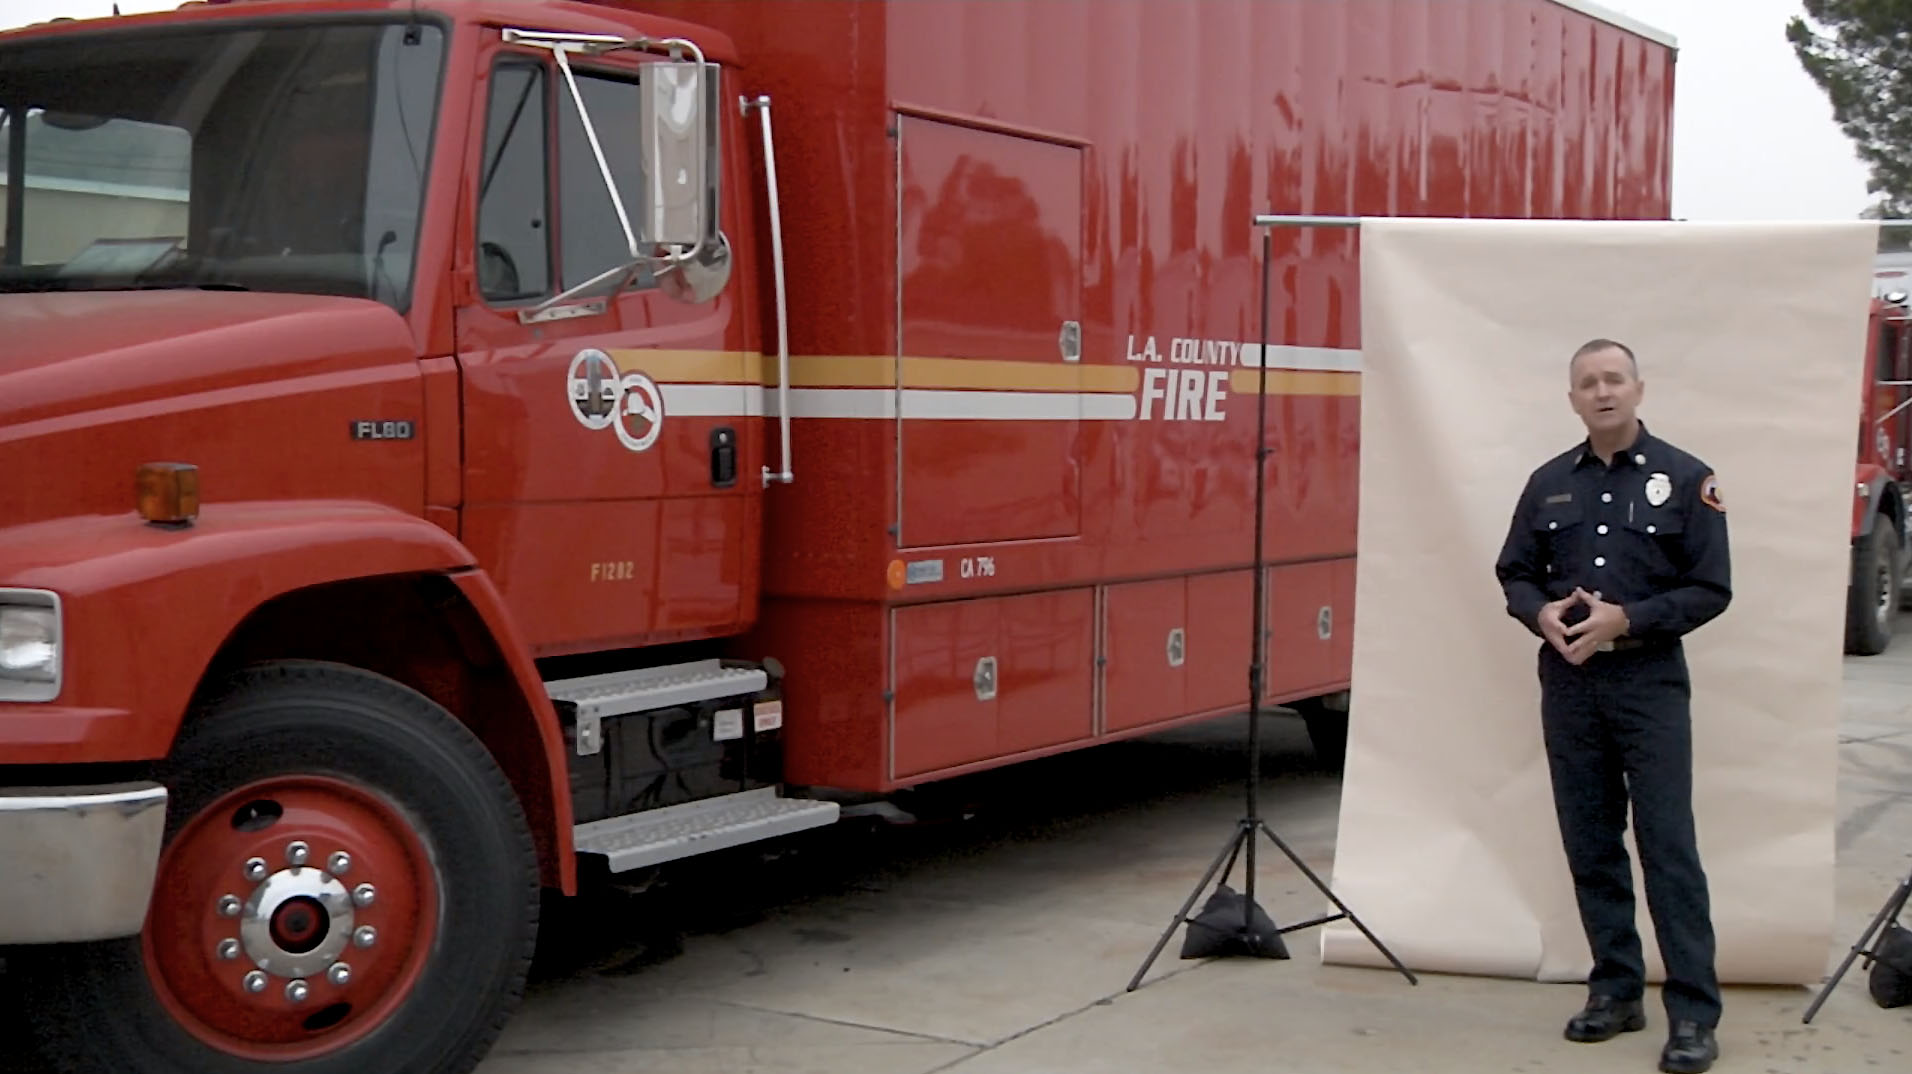 Photoshoot in front of a fire truck.